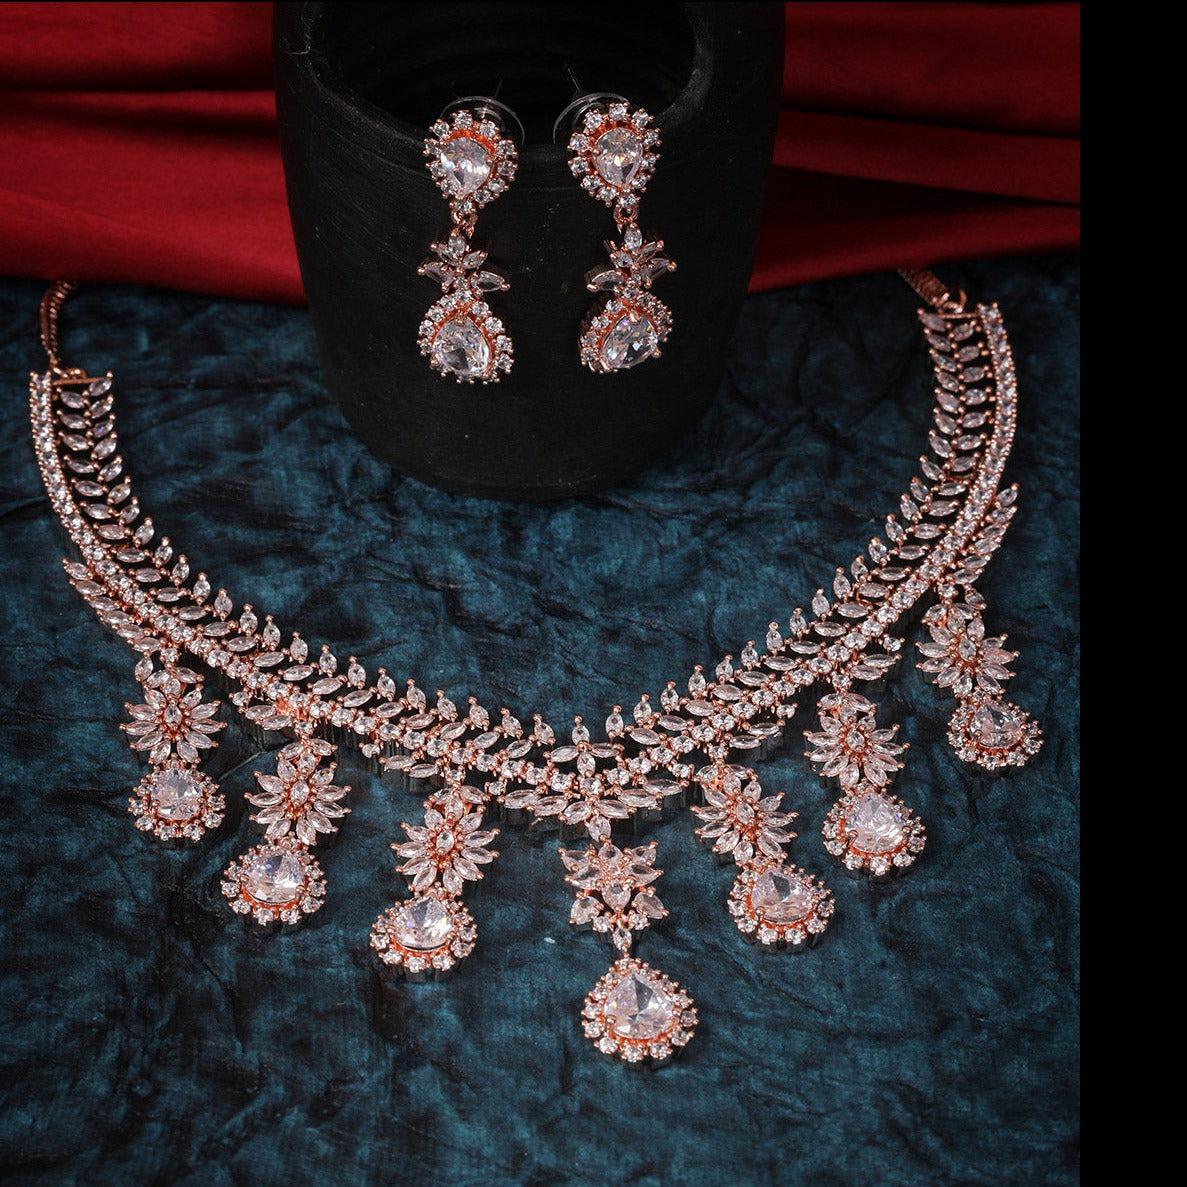 Premium Rose Gold Plated with sparkling White CZ stones Bridal Necklace Set 8922N